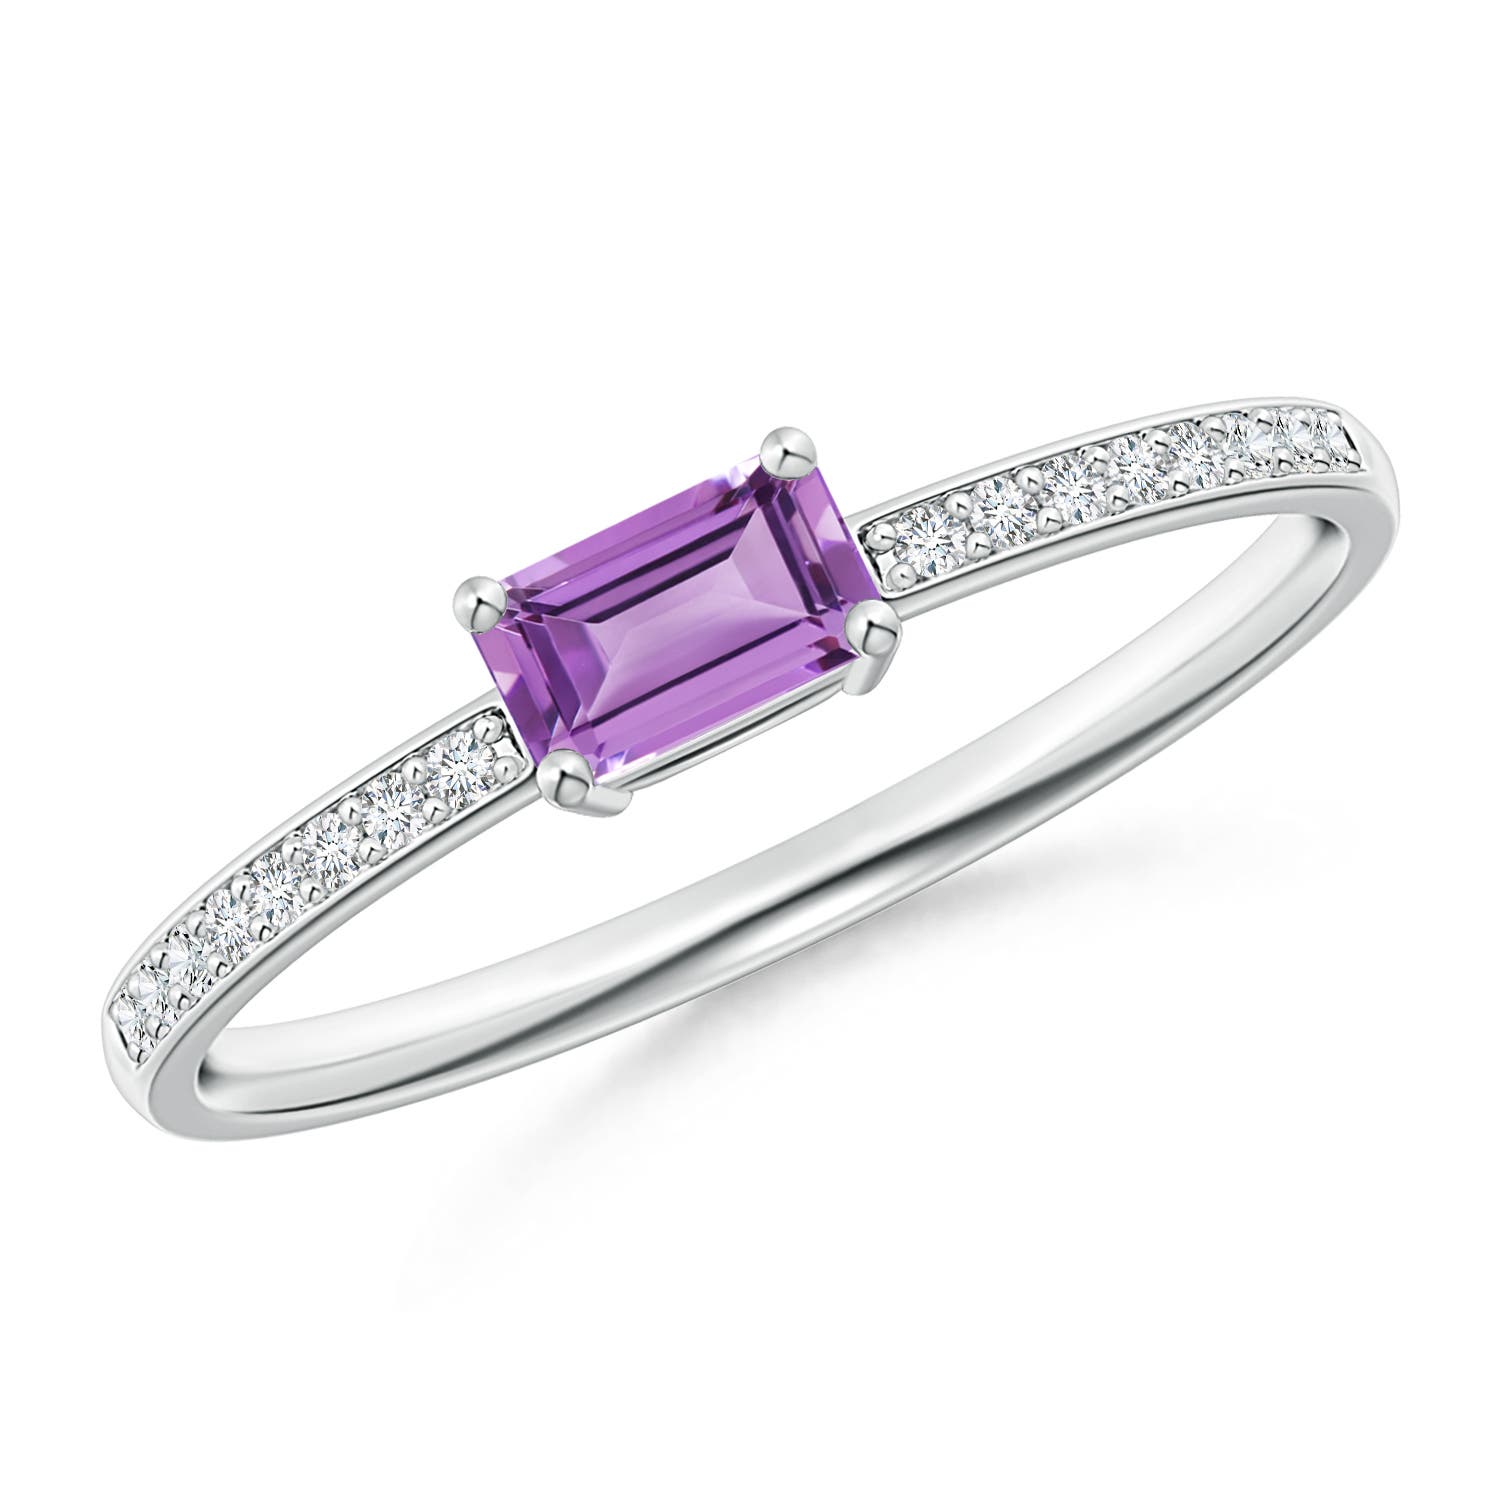 A - Amethyst / 0.33 CT / 14 KT White Gold